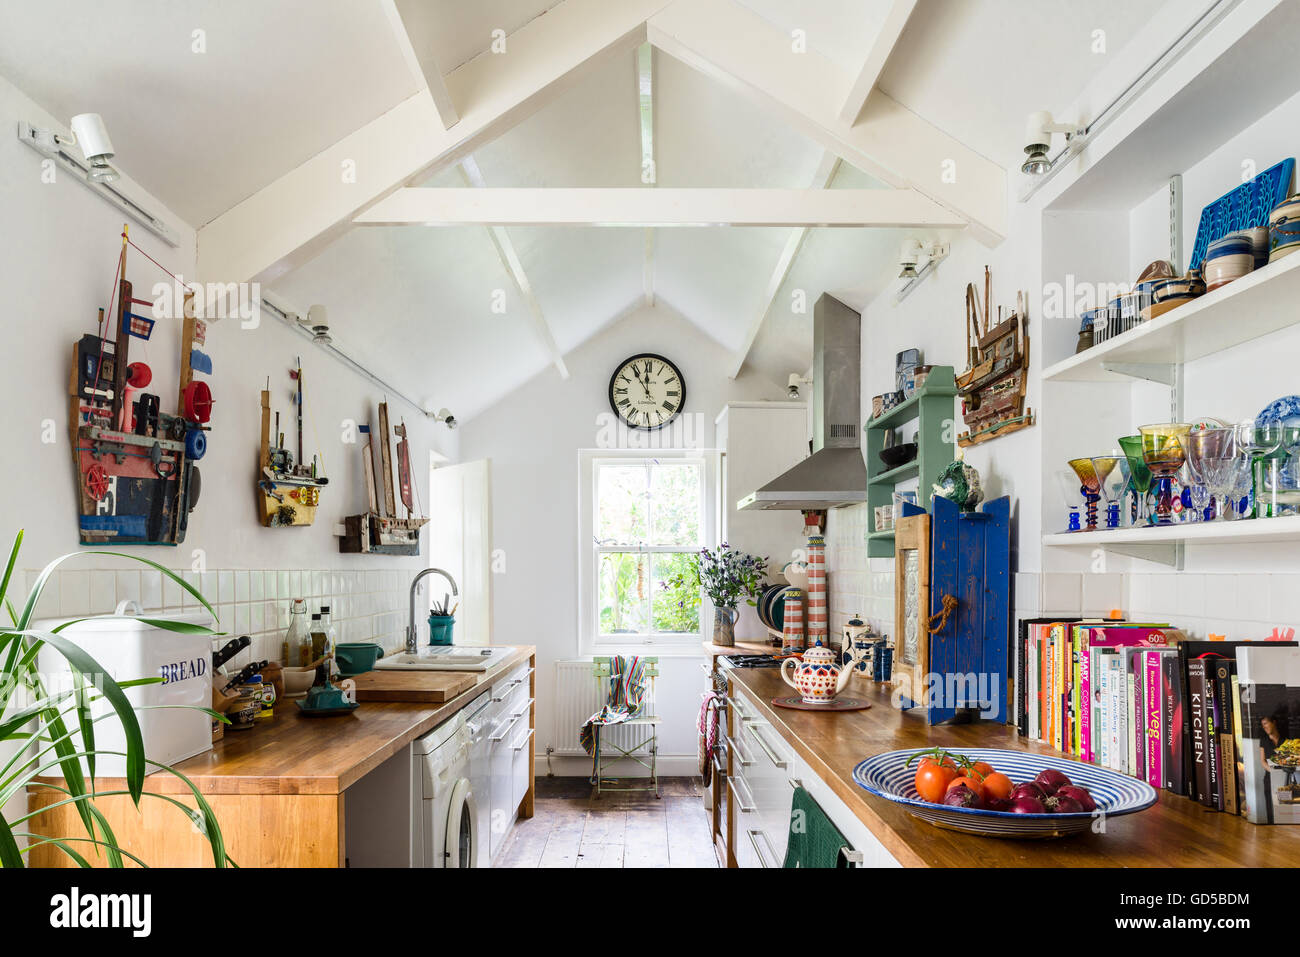 Galley style white kitchen with pitched roof, wooden worktops and open shelving. The walls are adorned with boats made by Rachel Stock Photo